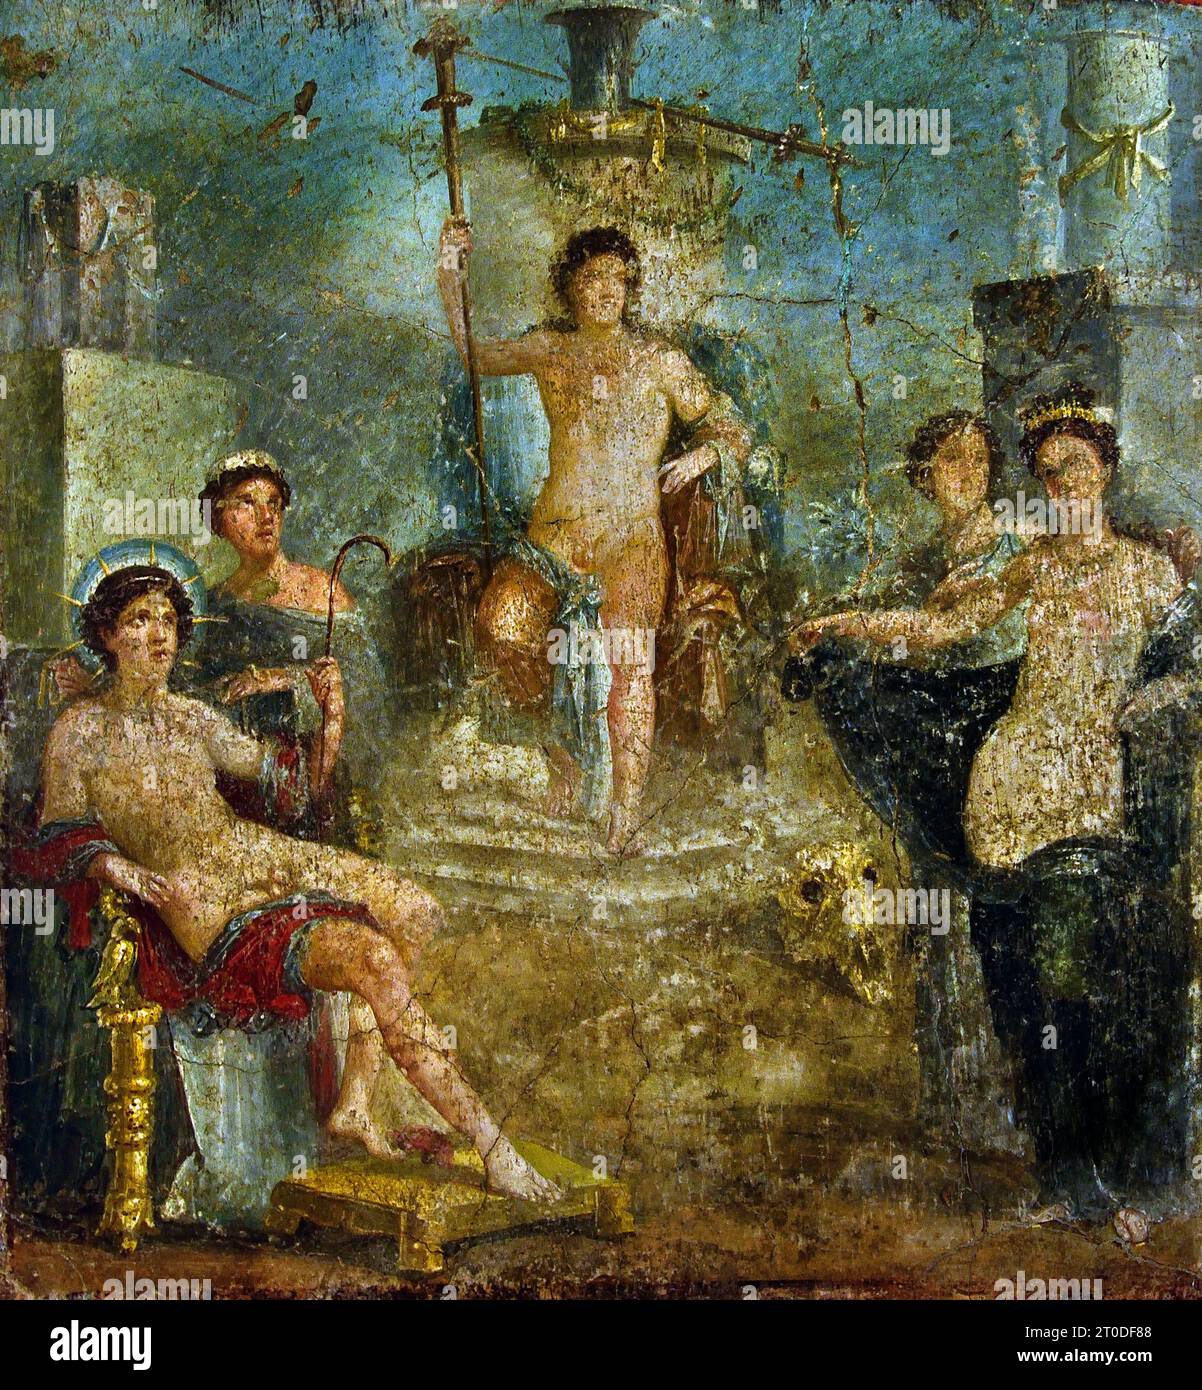 A contest between Venus and Hesperus. Apollo sitting as judge. House of the Gaius Rufus. Pompeii Fresco Pompeii Roman City is located near Naples in the Campania region of Italy. Pompeii was buried under 4-6 m of volcanic ash and pumice in the eruption of Mount Vesuvius in AD 79. Italy Stock Photo